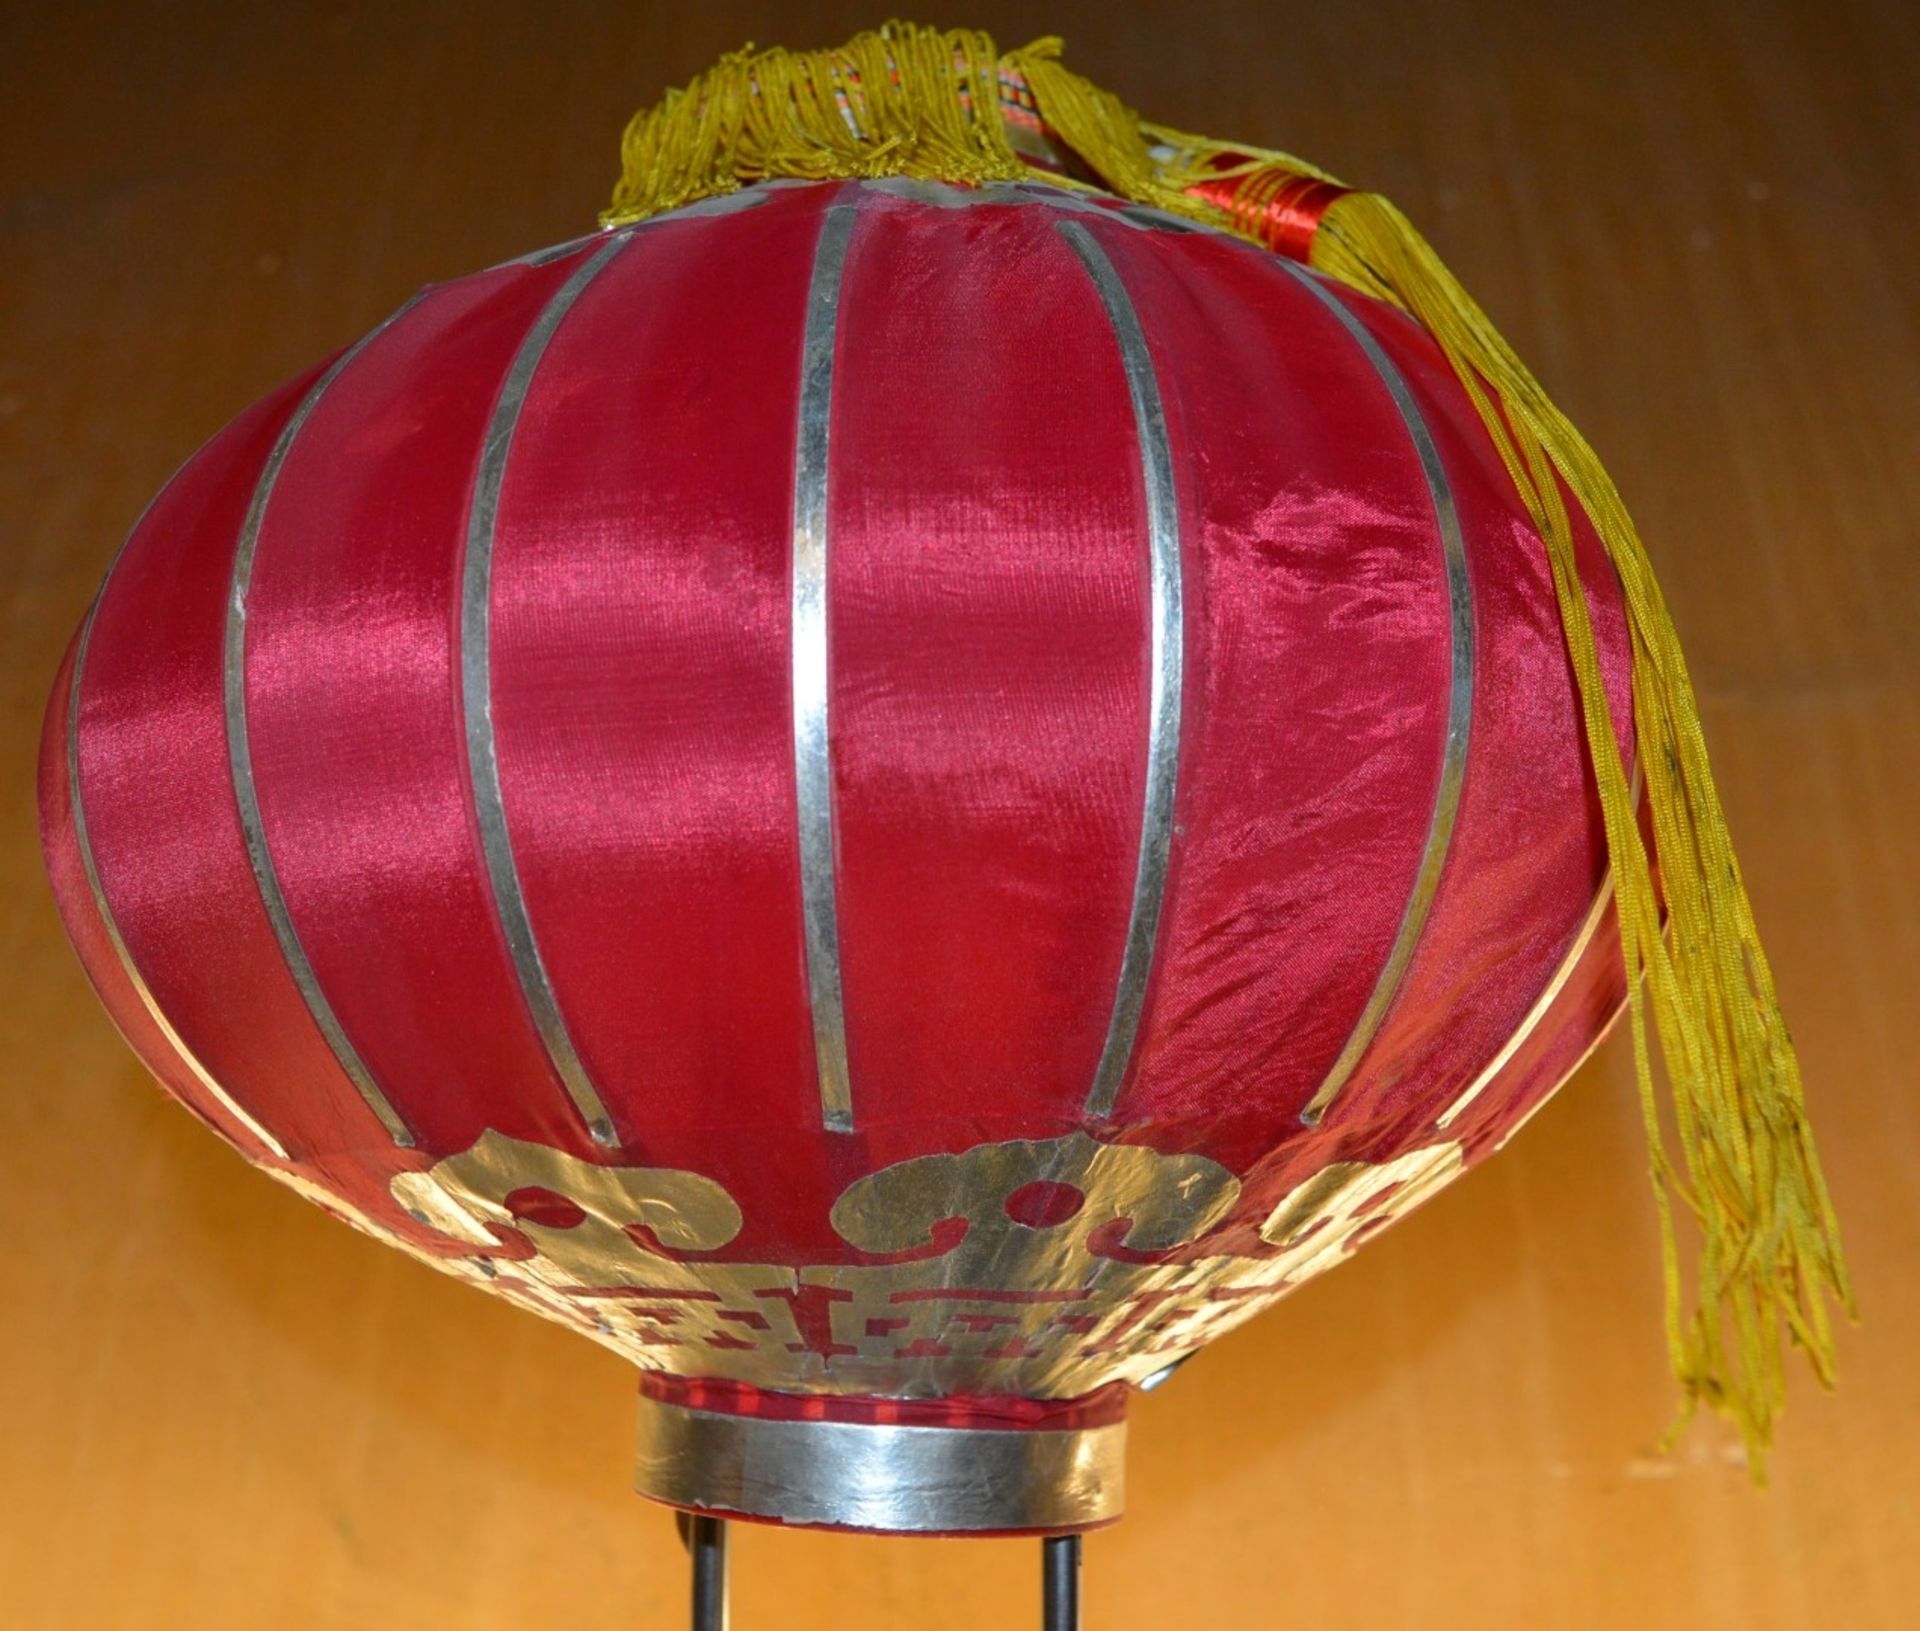 13 x Chinese Lanterns - CL180 - Ref IC263 - Location: London EC3V Collection Details: Collection